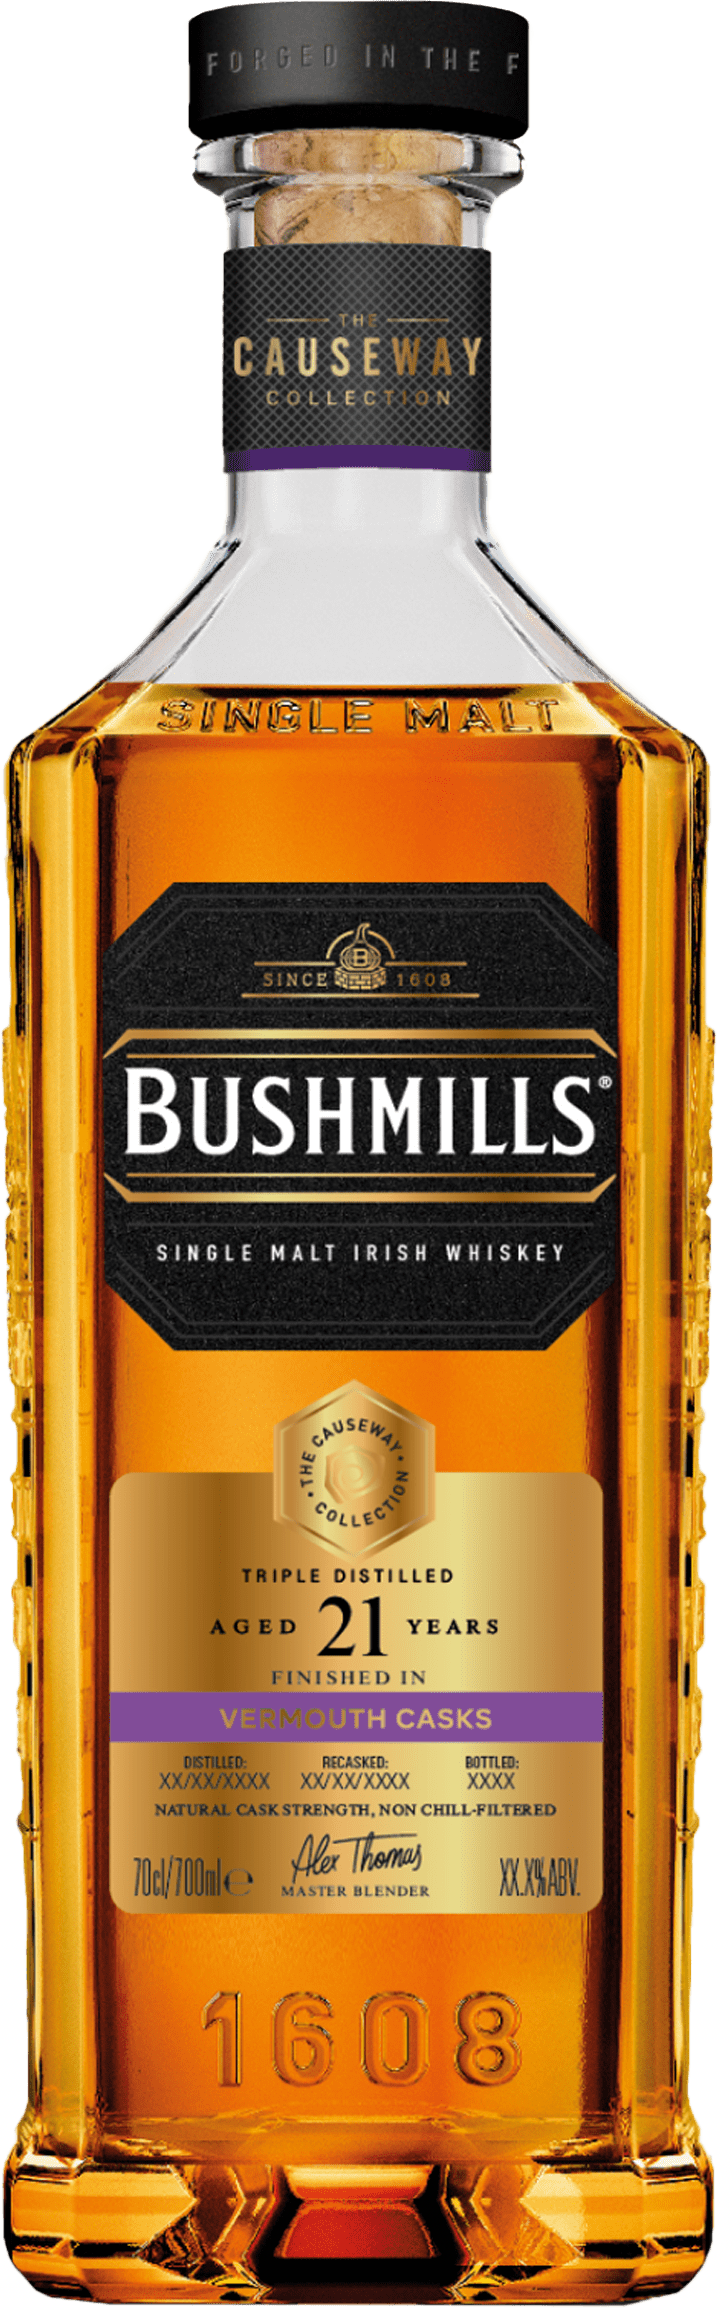 Bushmills »Causeway Collection« Vermouth 21 Years